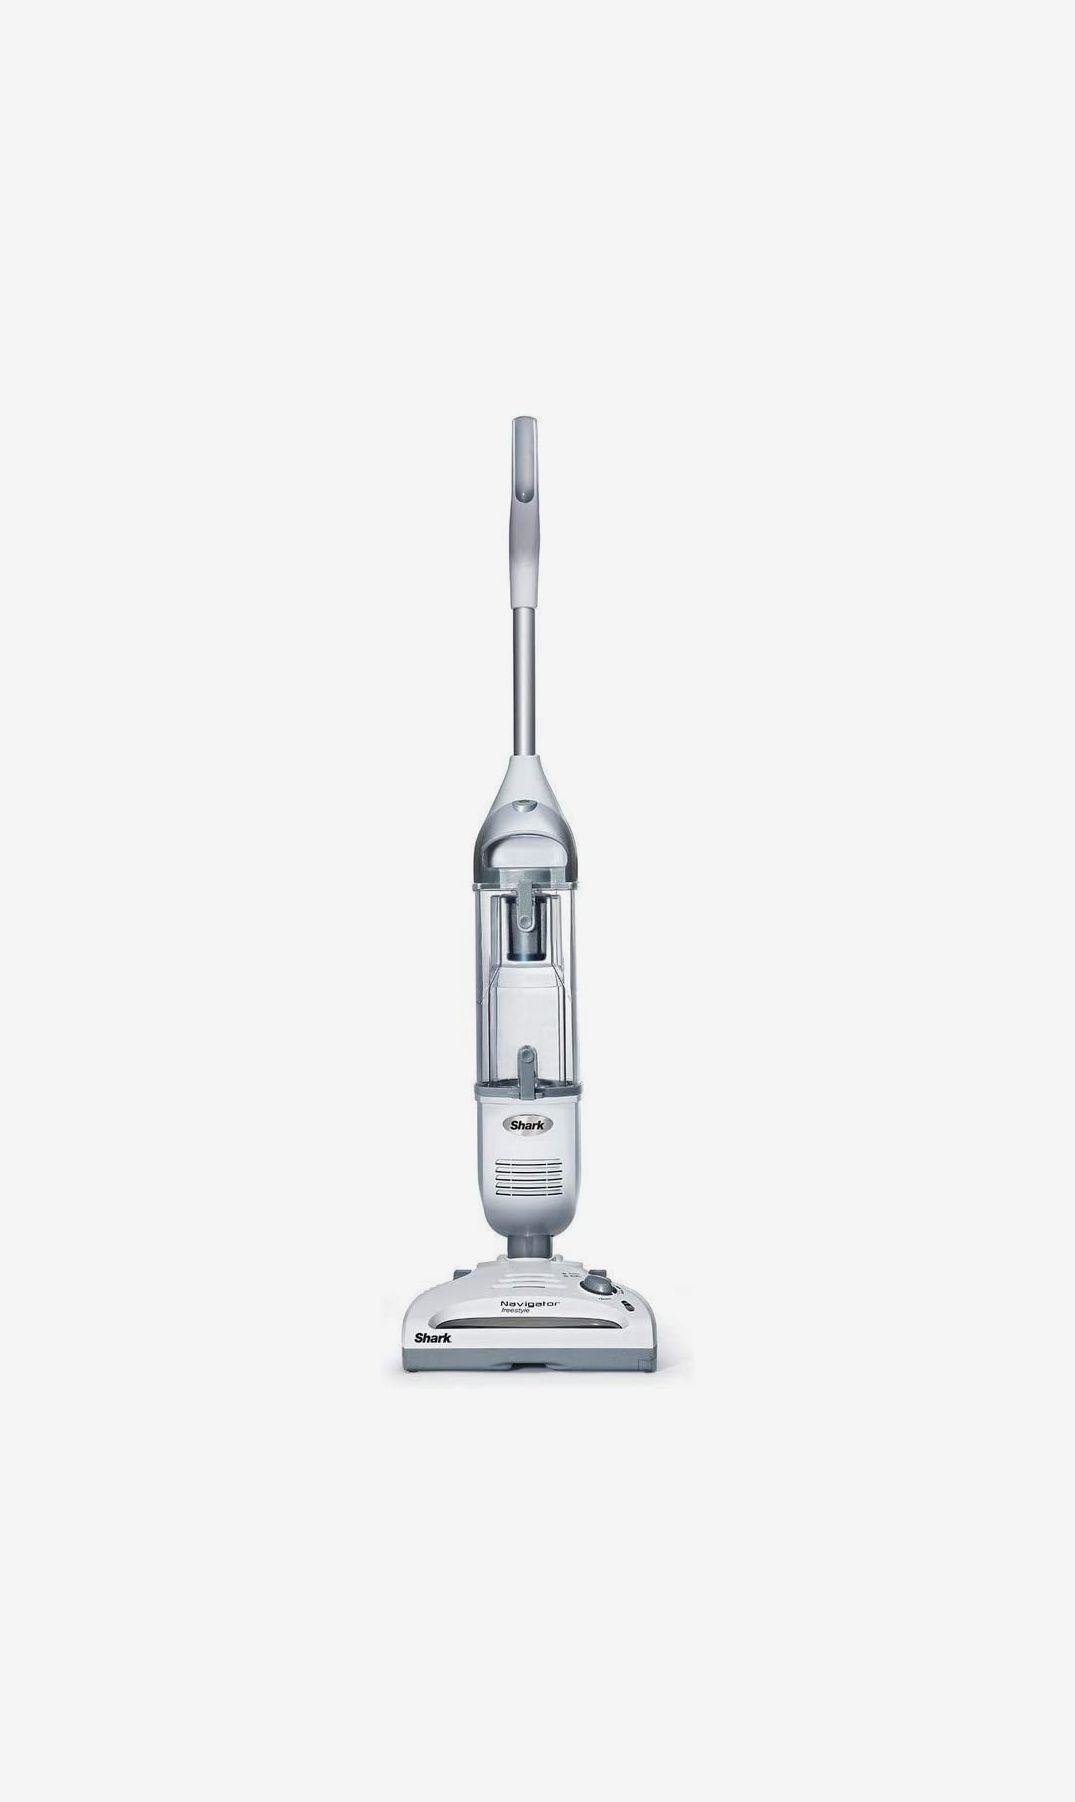 Stick Vacuums 9 Best Cordless Stick Vacuums to Buy 2021 | The Strategist